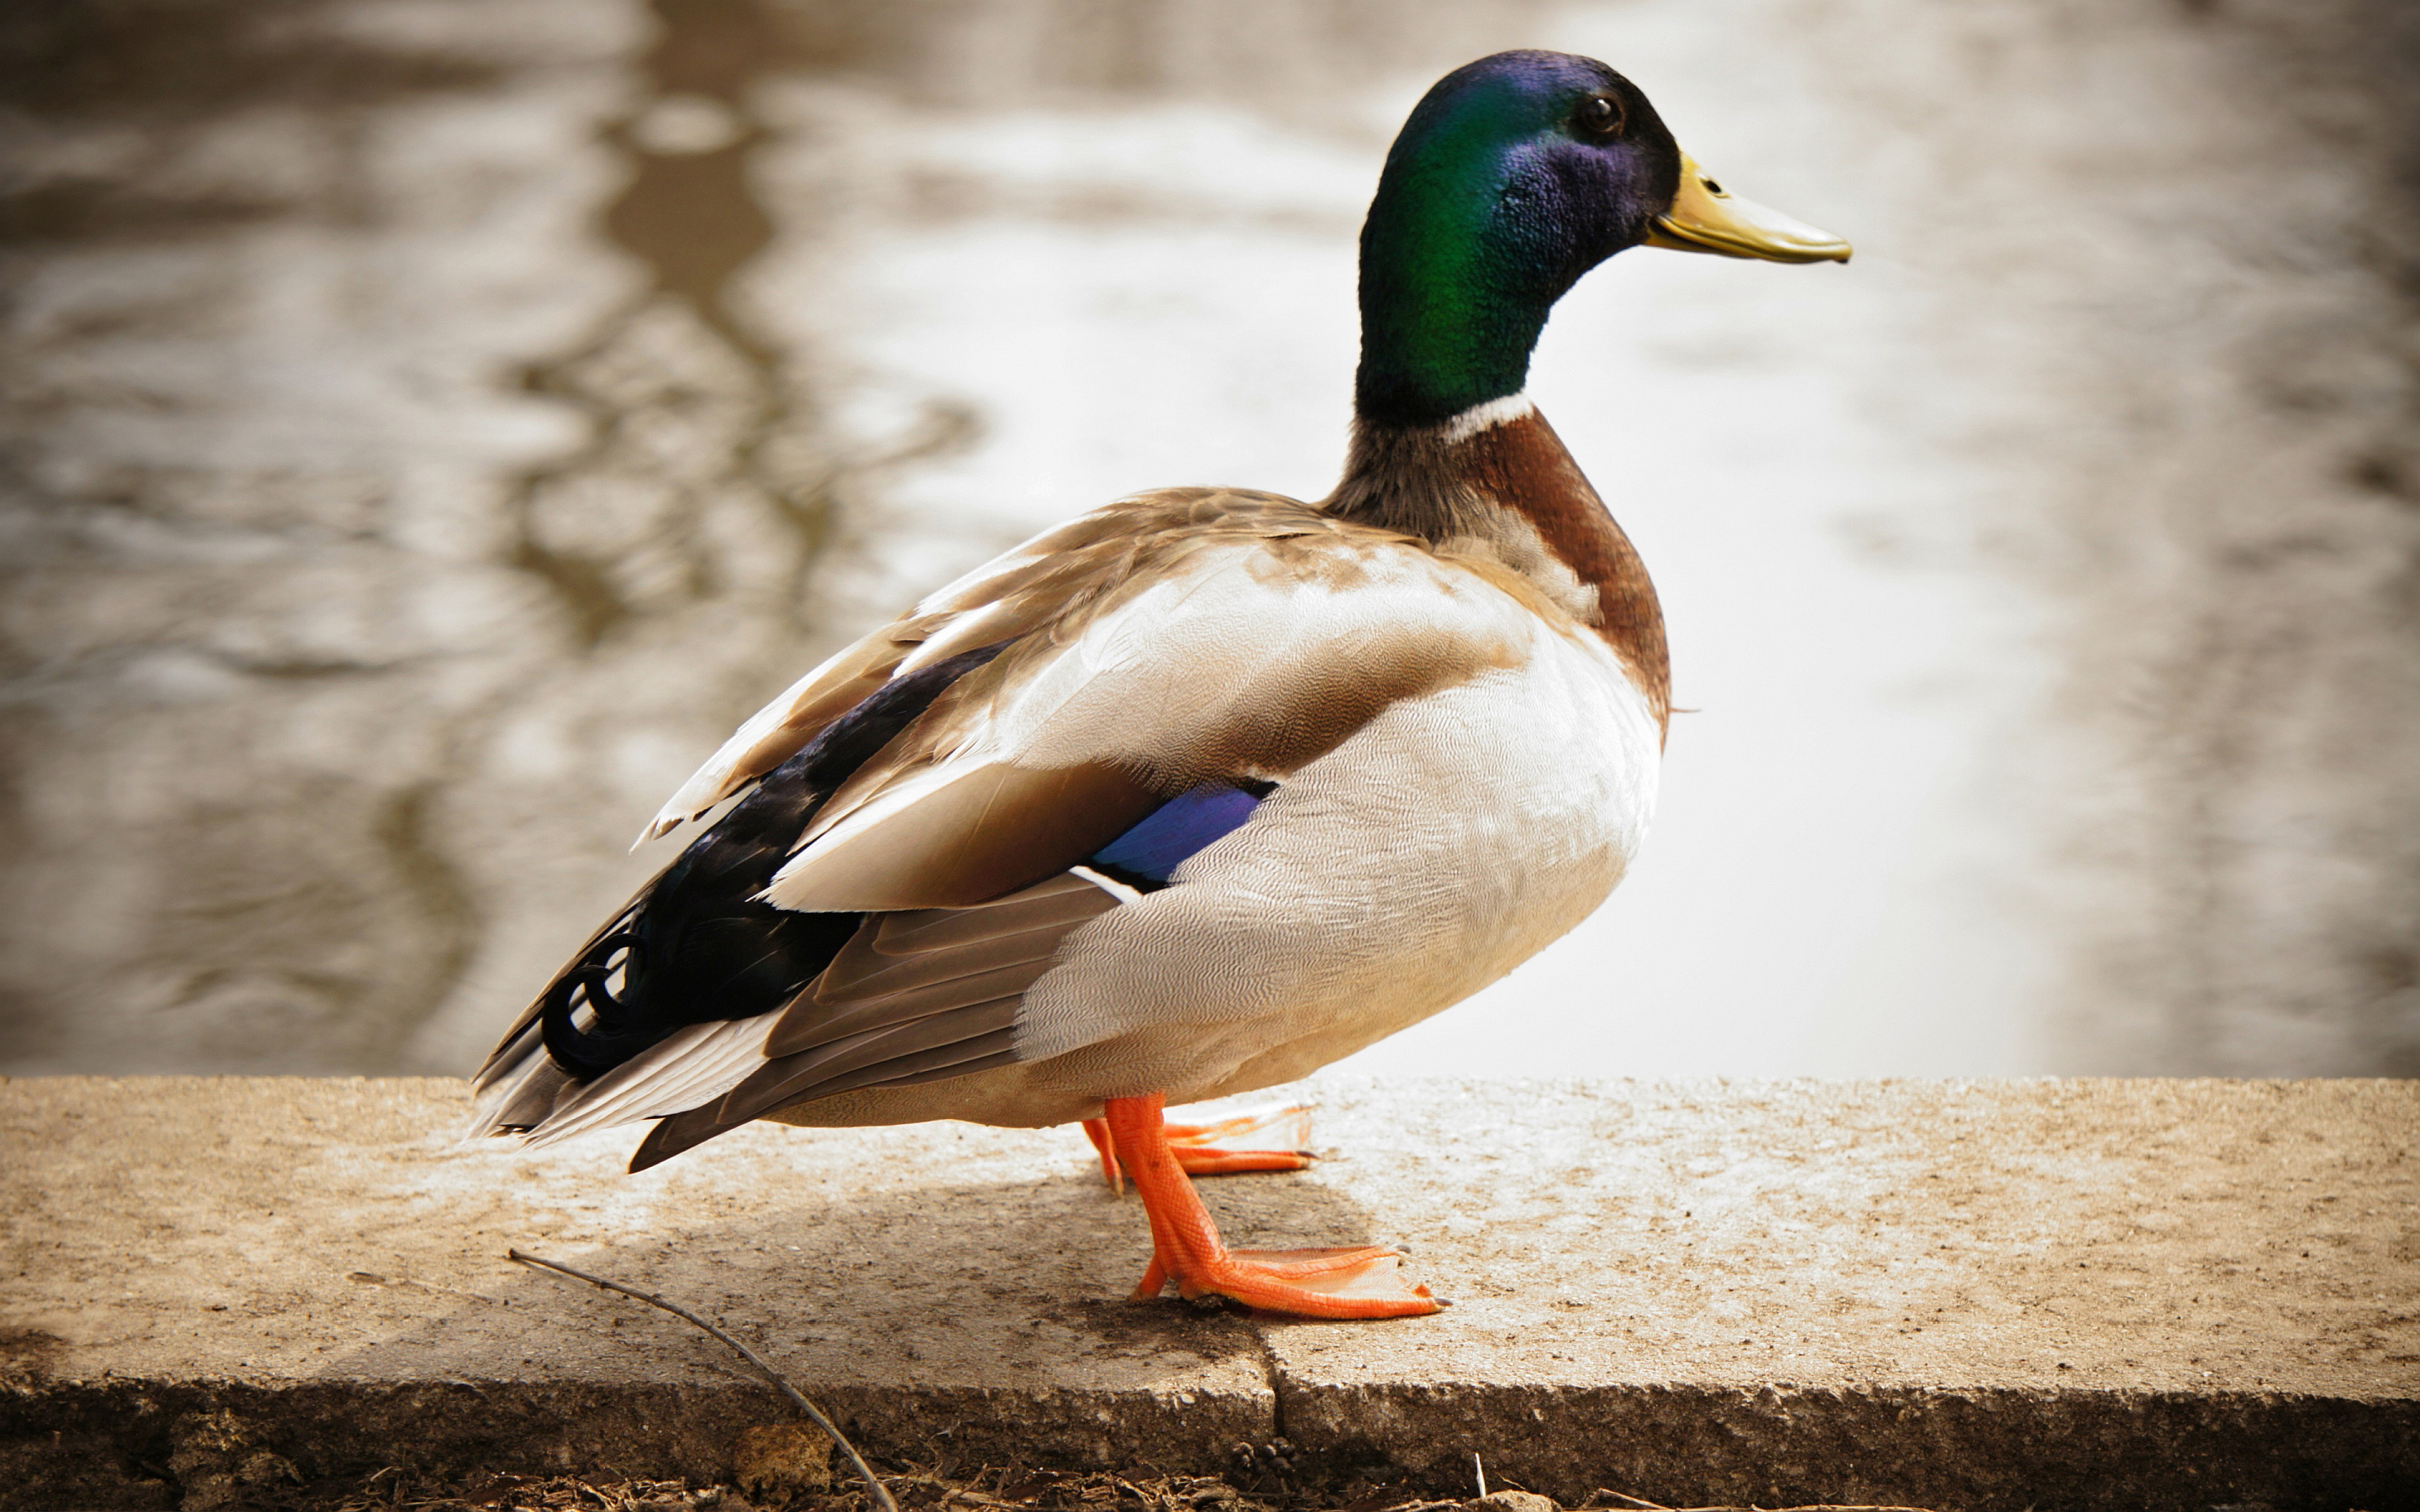 4k Duck Wallpapers High Quality Download Free HD Wallpapers Download Free Images Wallpaper [wallpaper981.blogspot.com]